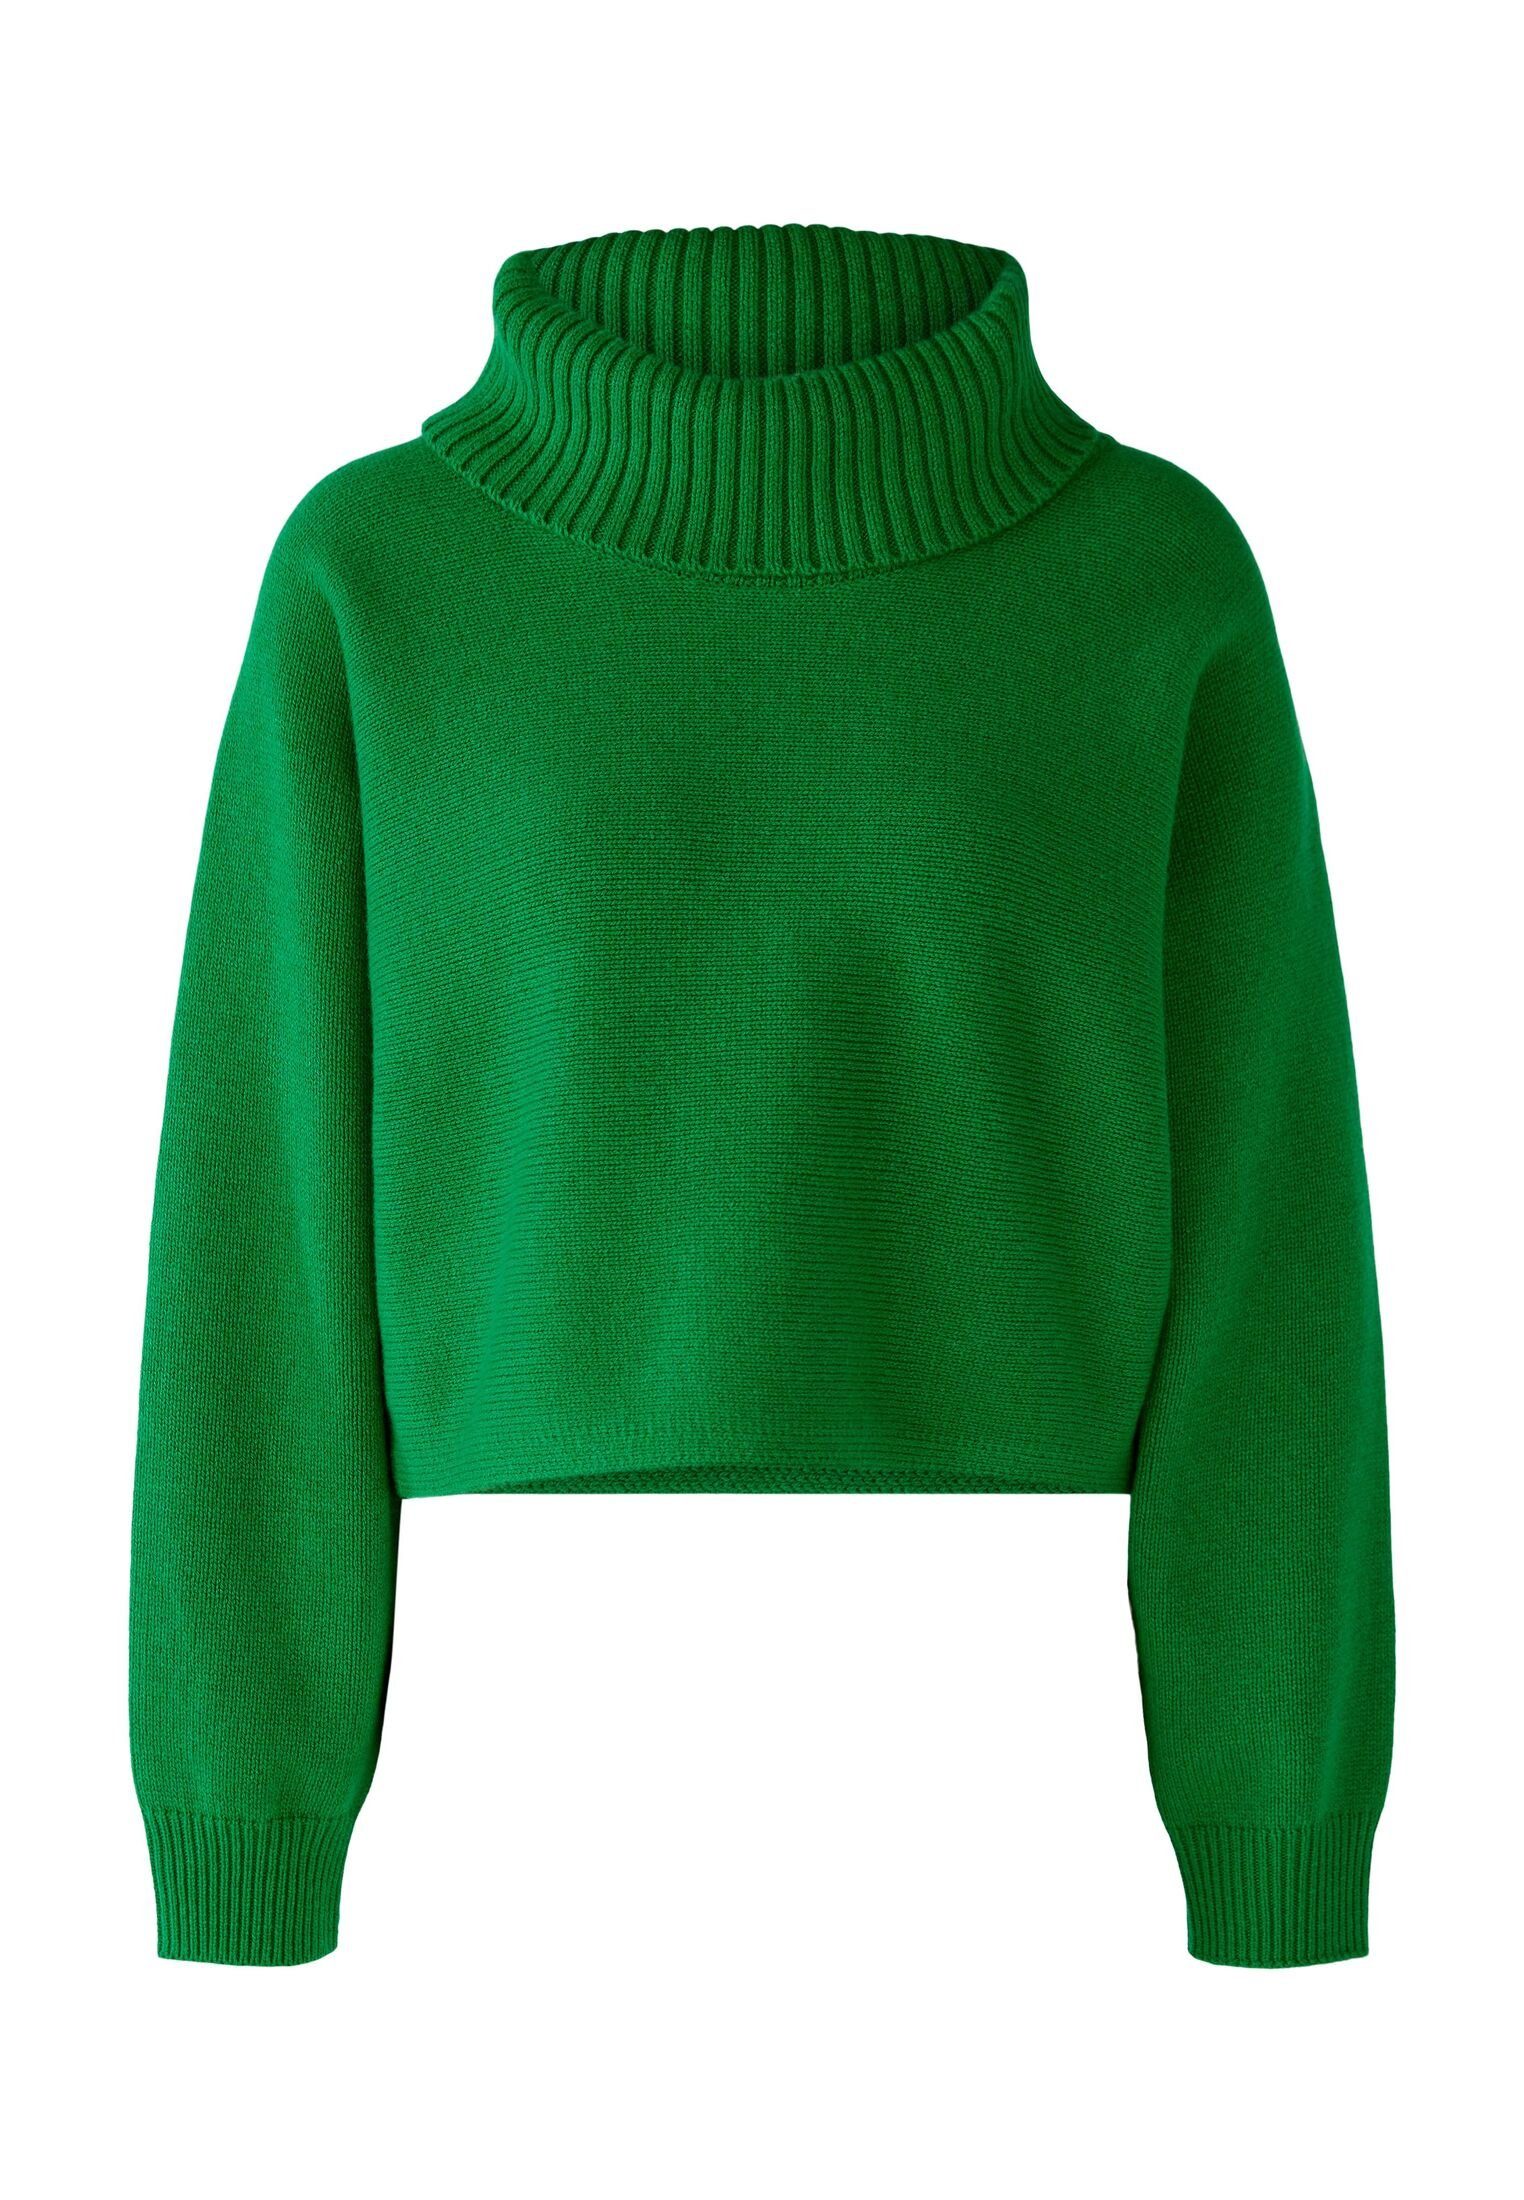 Oui Strickpullover Pullover Wollmischung green